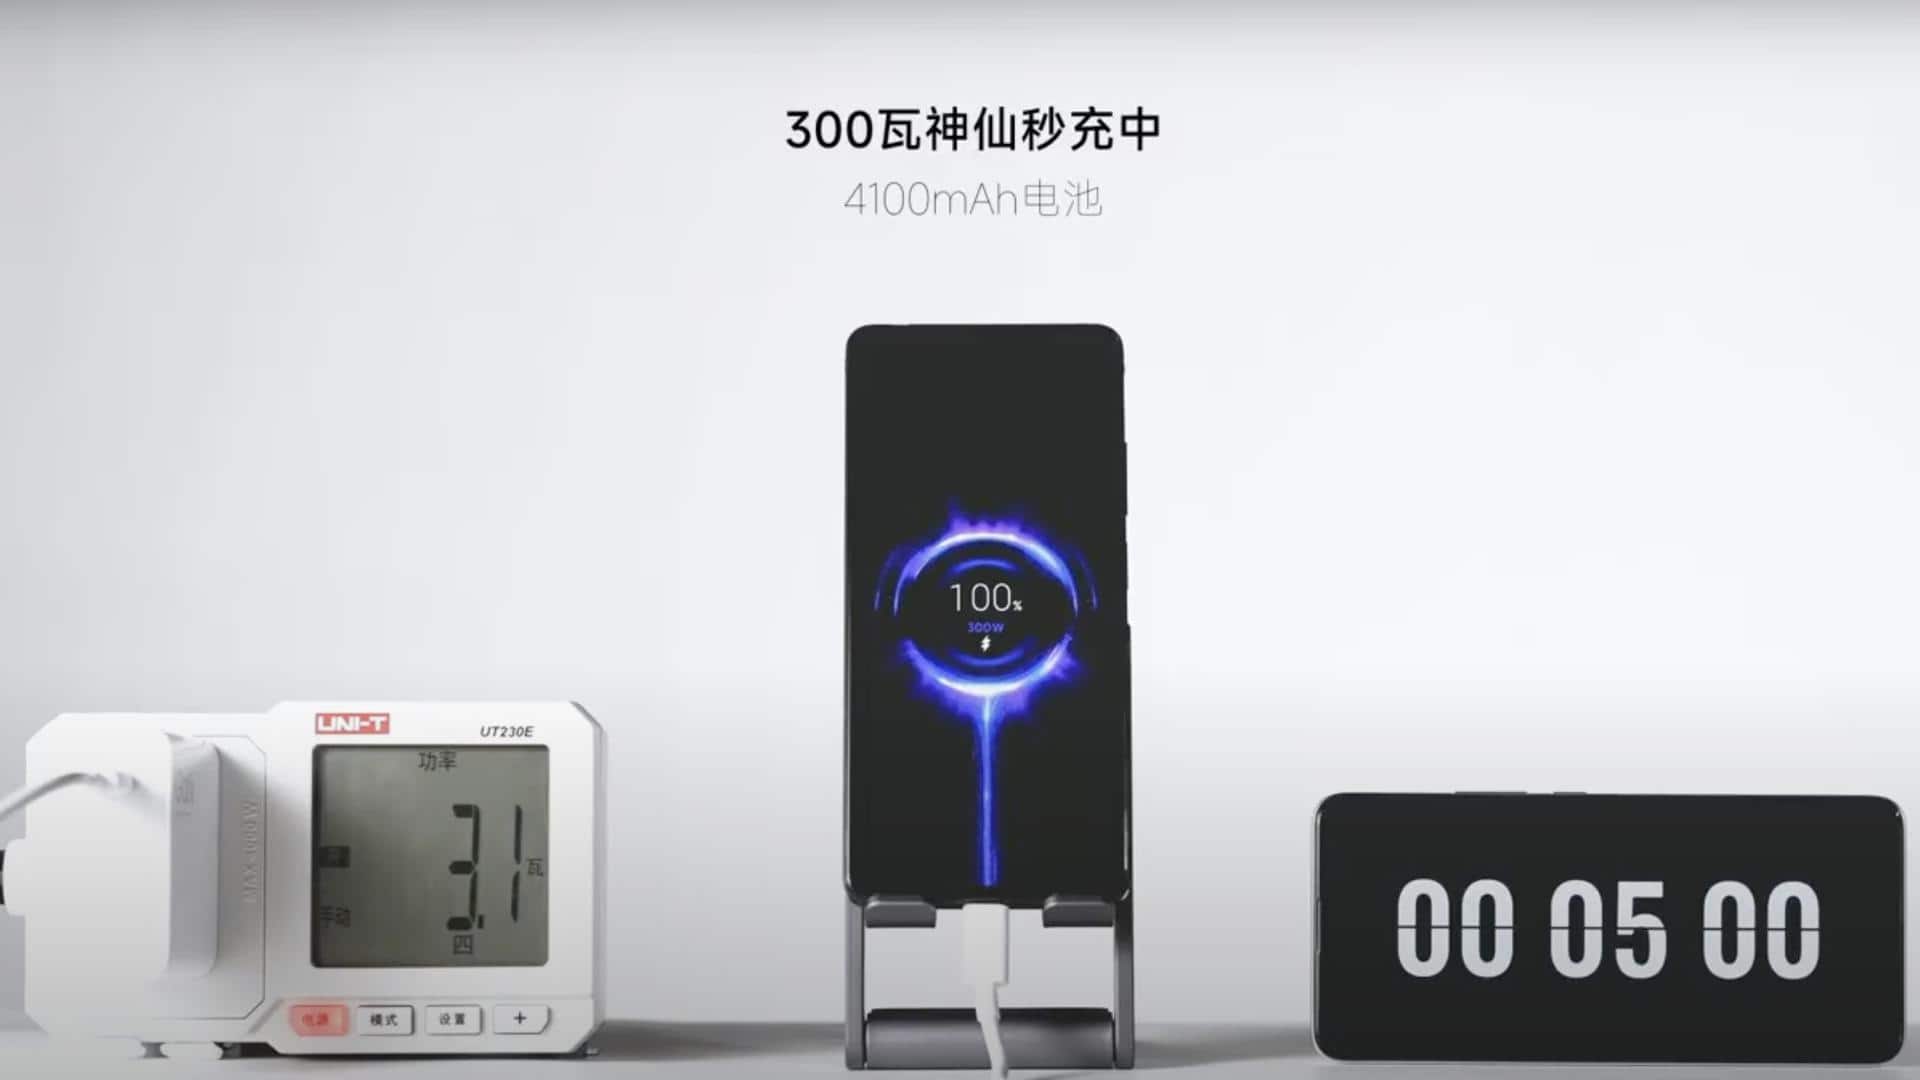 Redmi's 300W charging technology fuels phones in under 5 mins